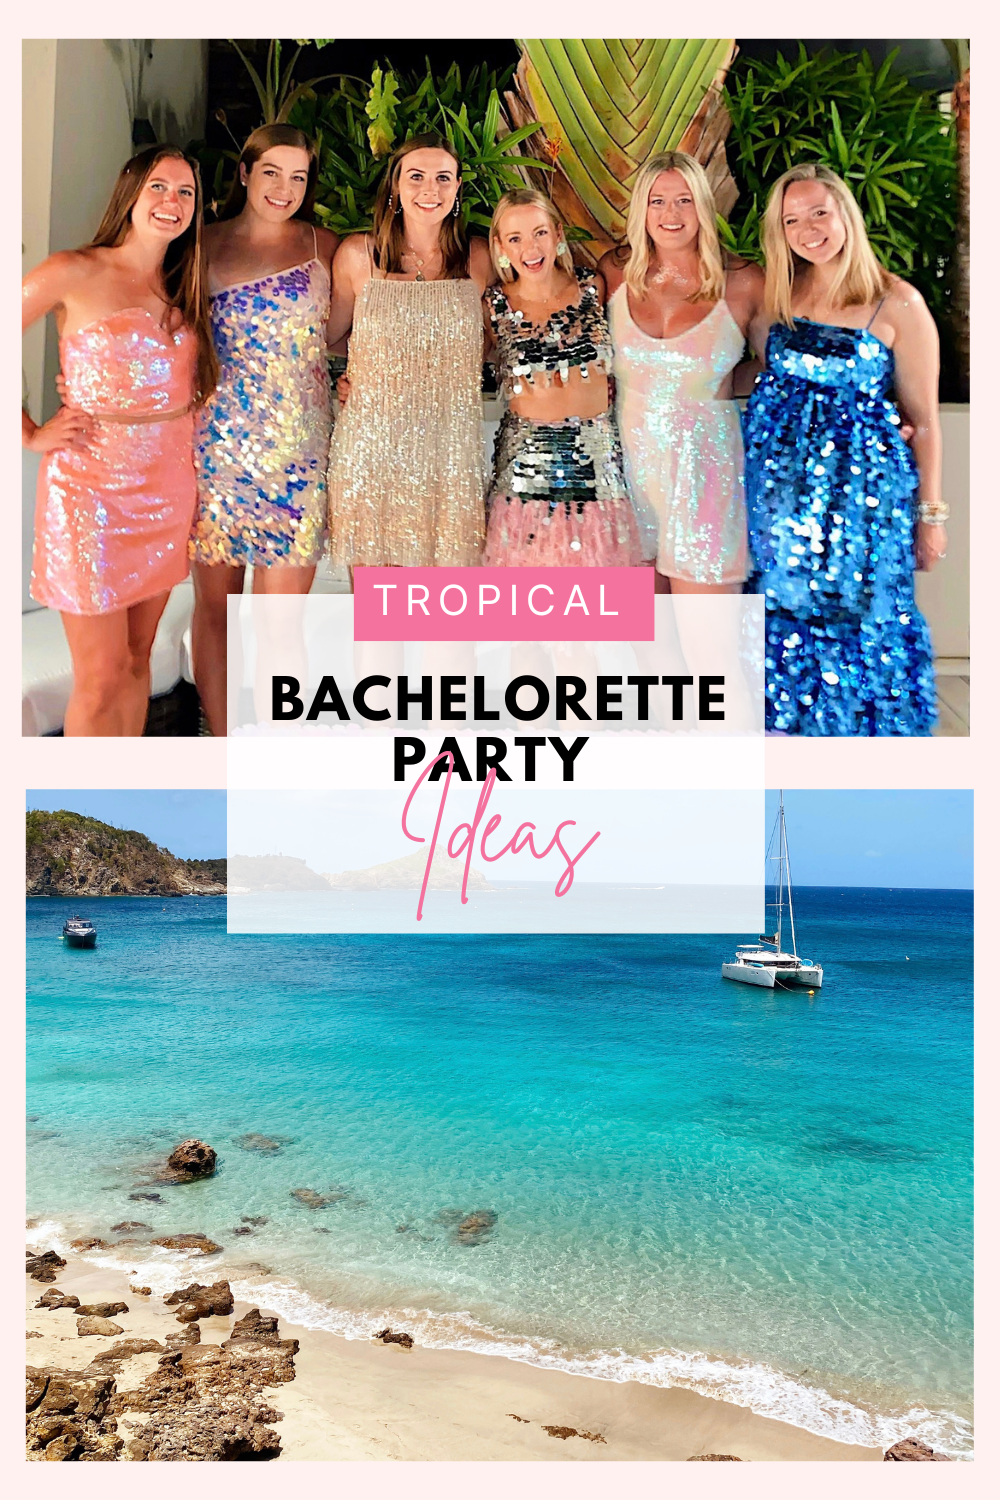 St. Barts Bachelorette Party - Sprinkled With Pink